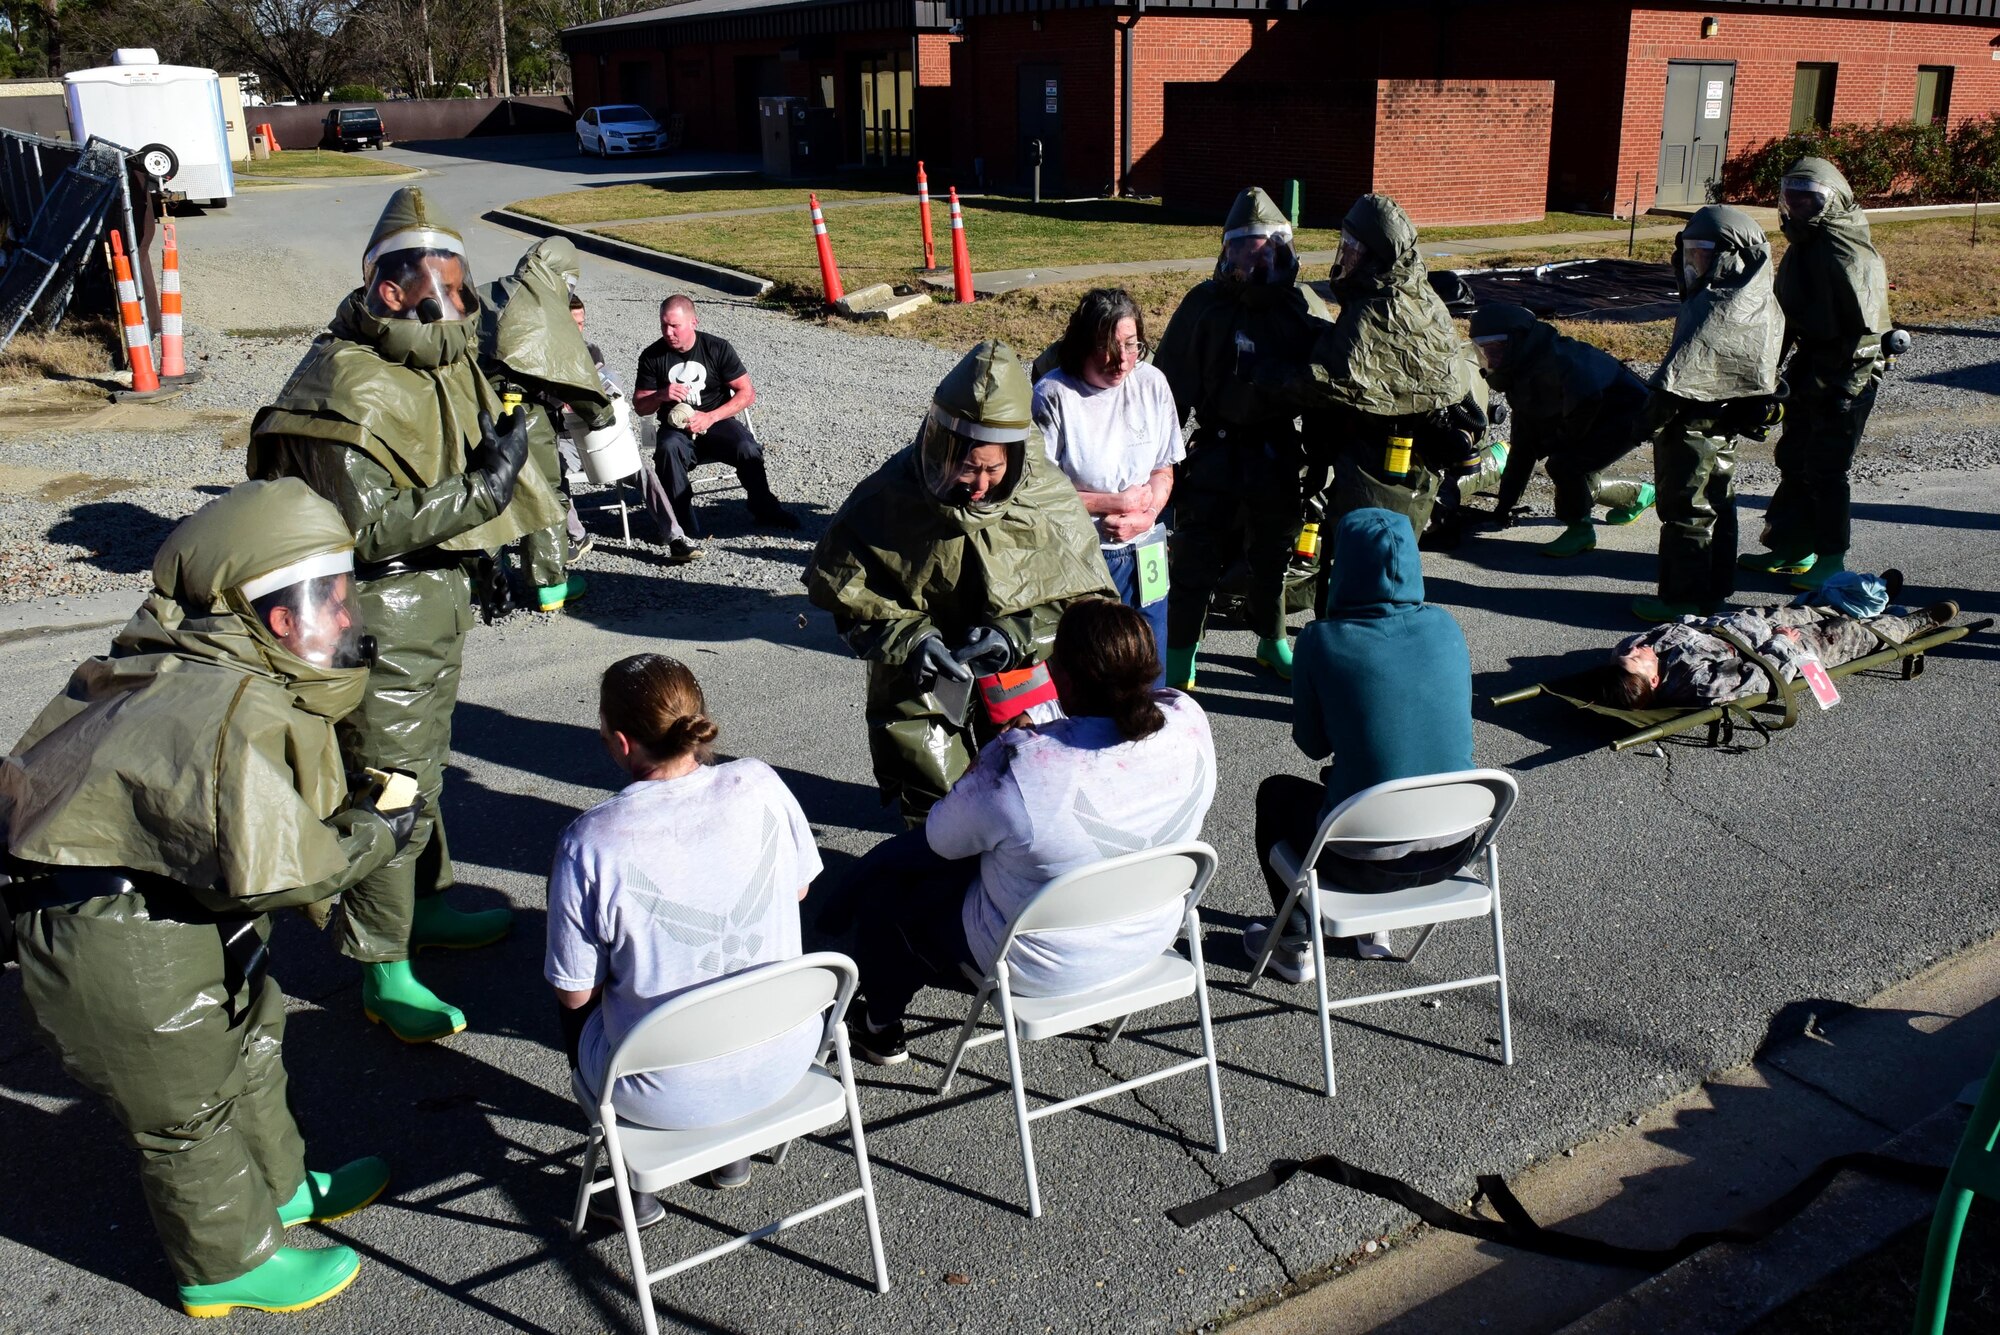 Members of the 4th Medical Group decontamination team treat patients covered with simulated biohazard material during a chemical, biological, radiological, nuclear and explosive mass casualty exercise Dec. 13, 2017, at Seymour Johnson Air Force Base, North Carolina.